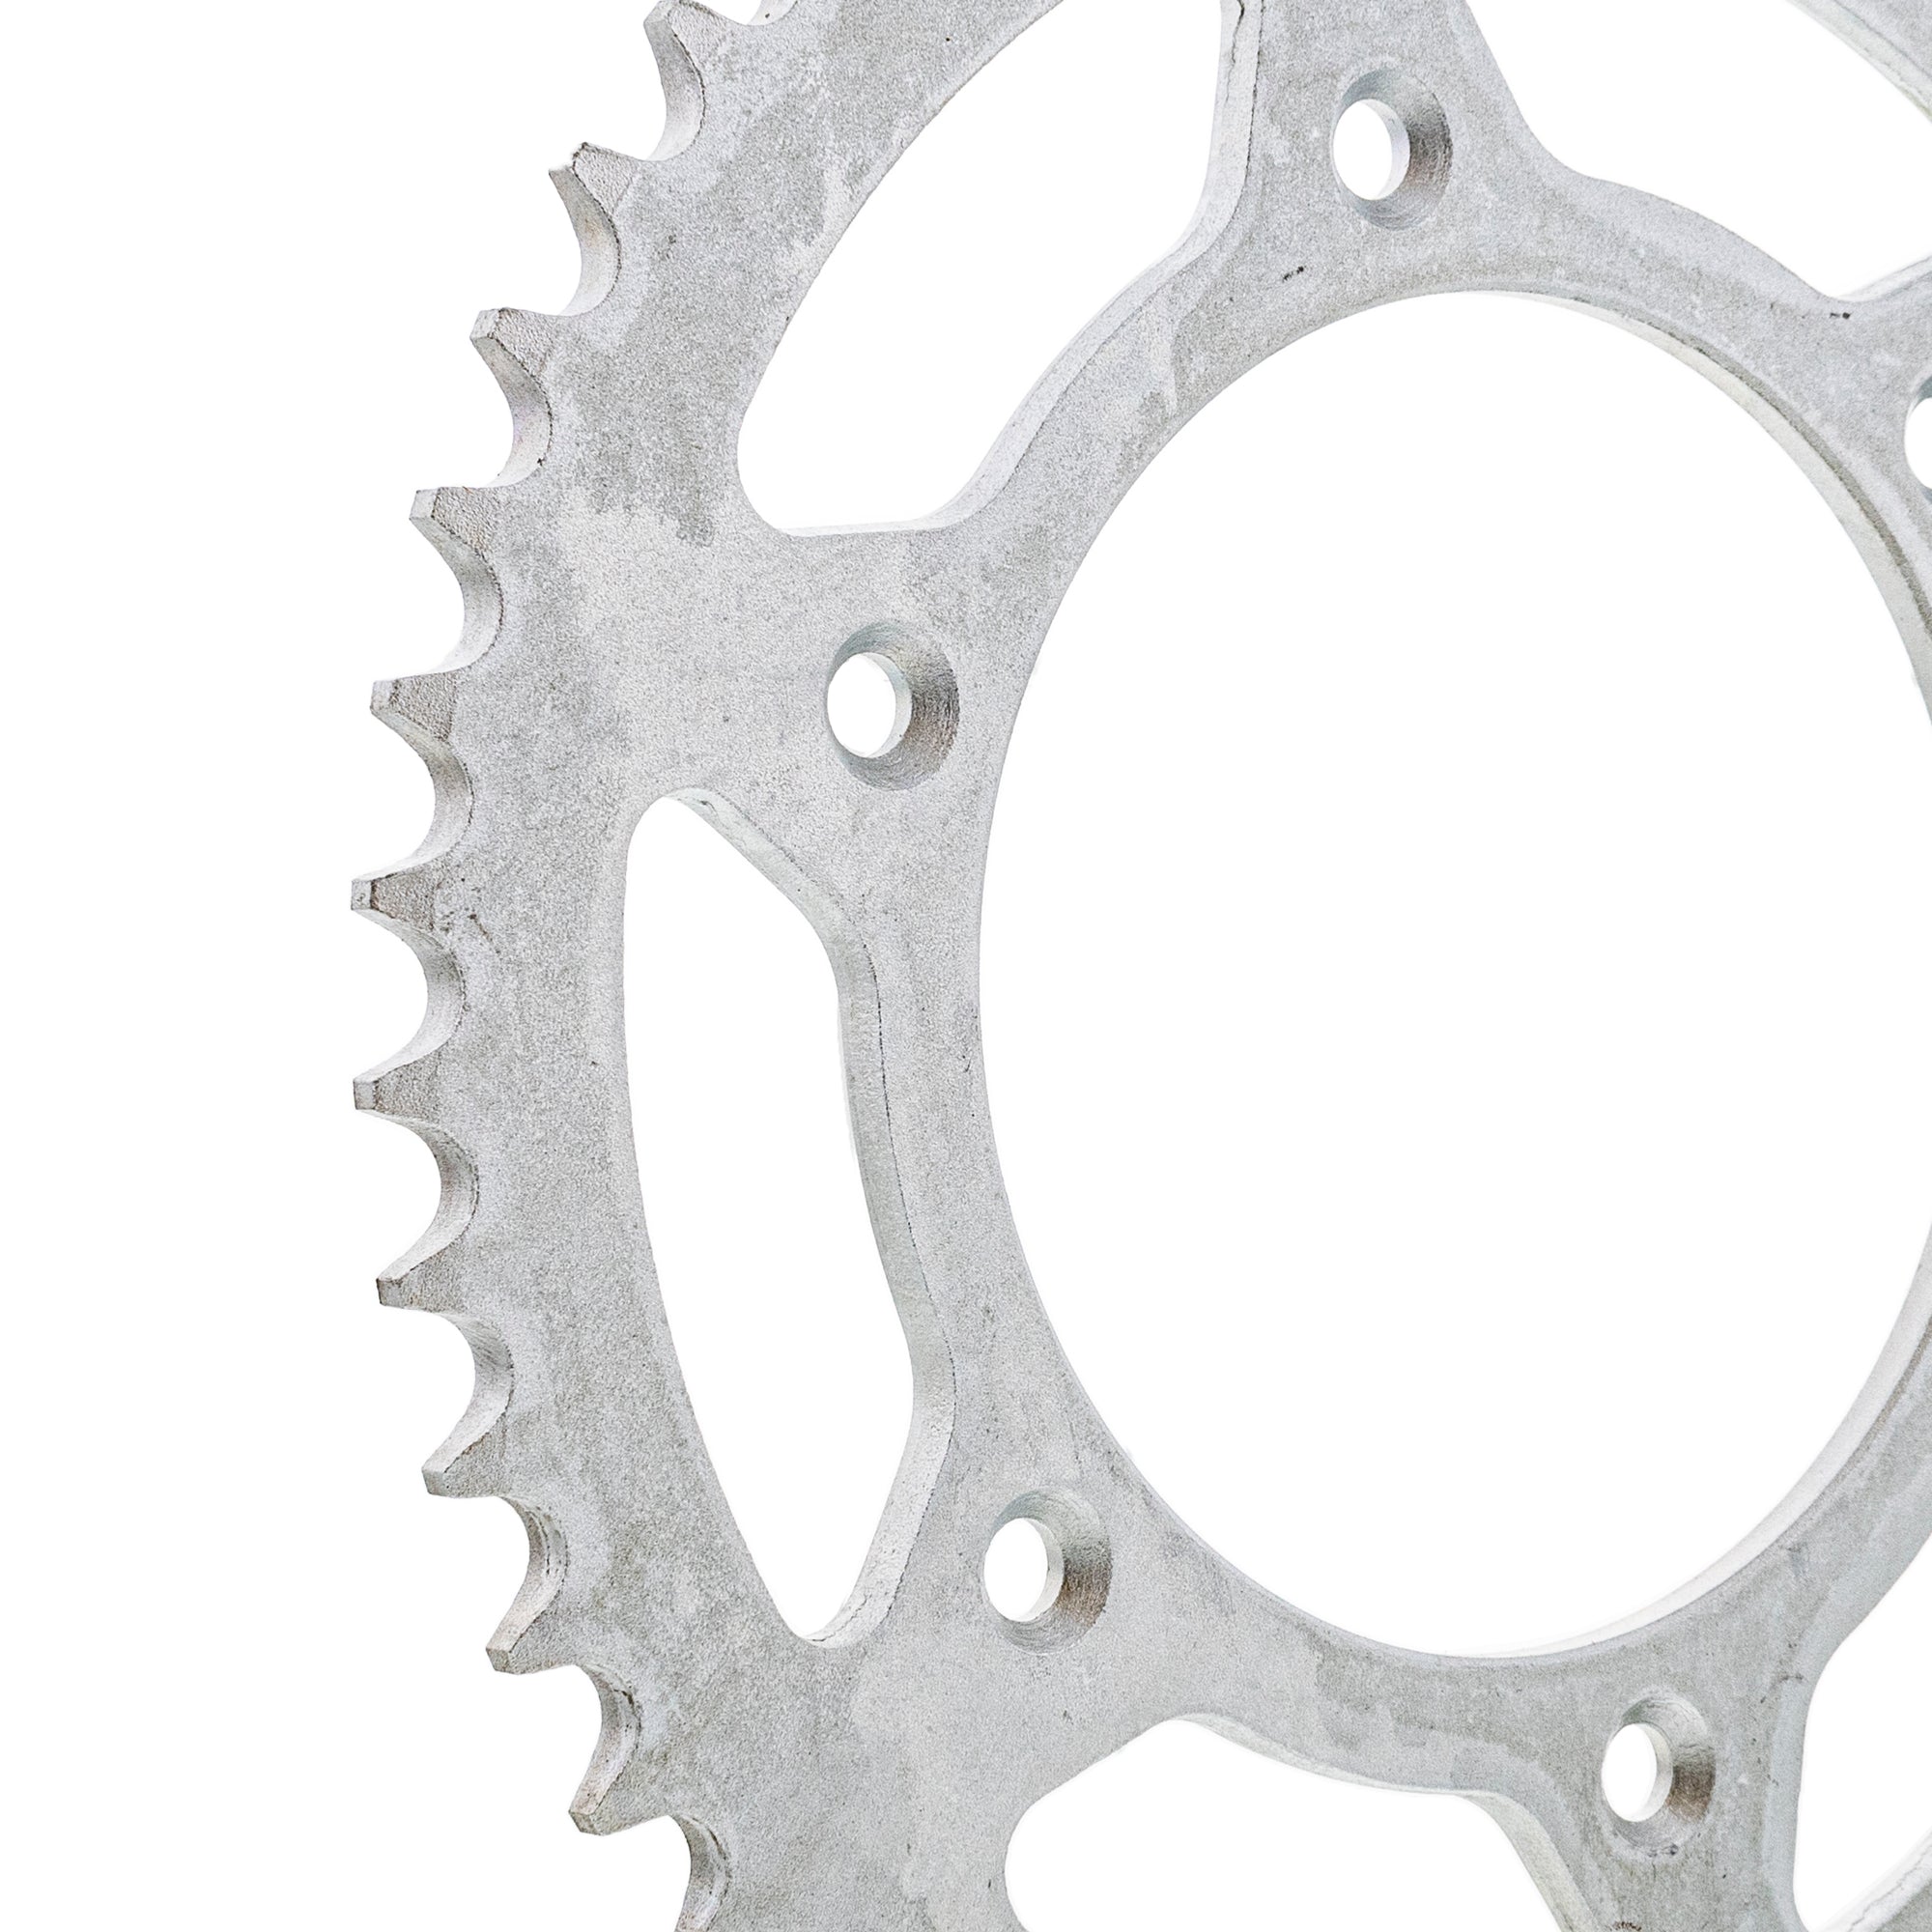 520 Front 13T Rear 48T Drive Sprocket Kit for Honda CRF250R